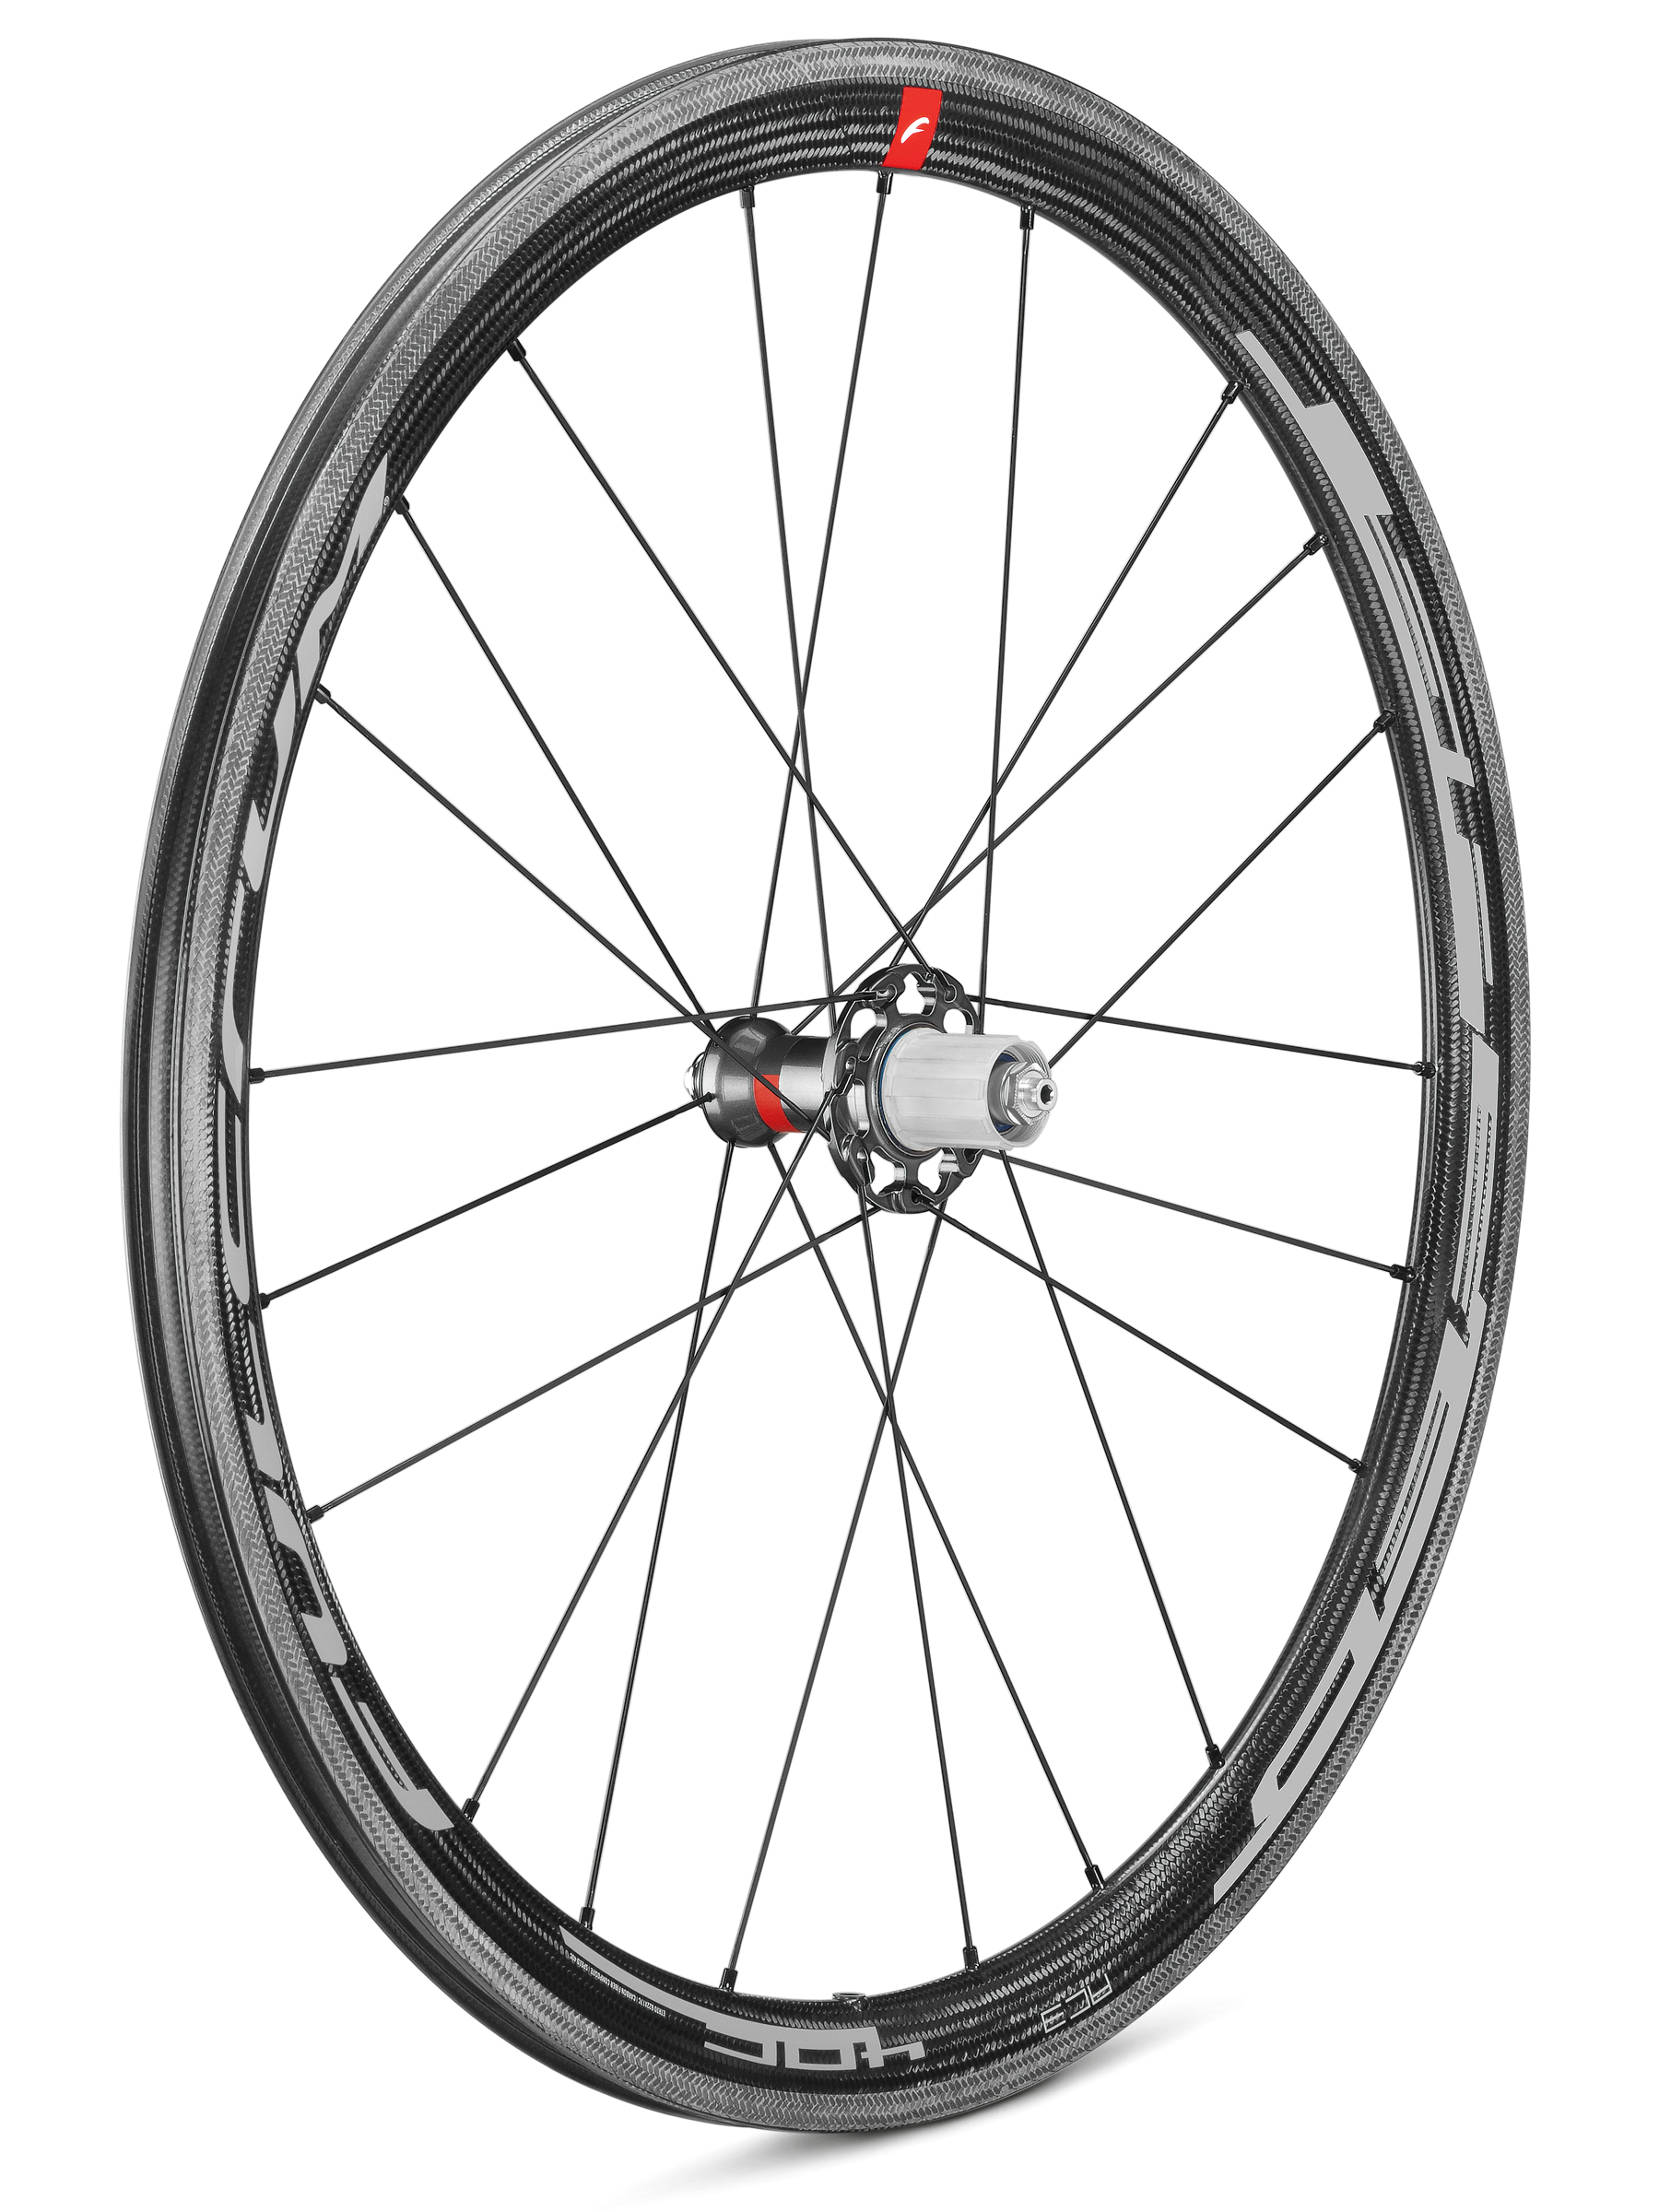 Fulcrum rolls out new Speed 40C & 55C carbon road clinchers